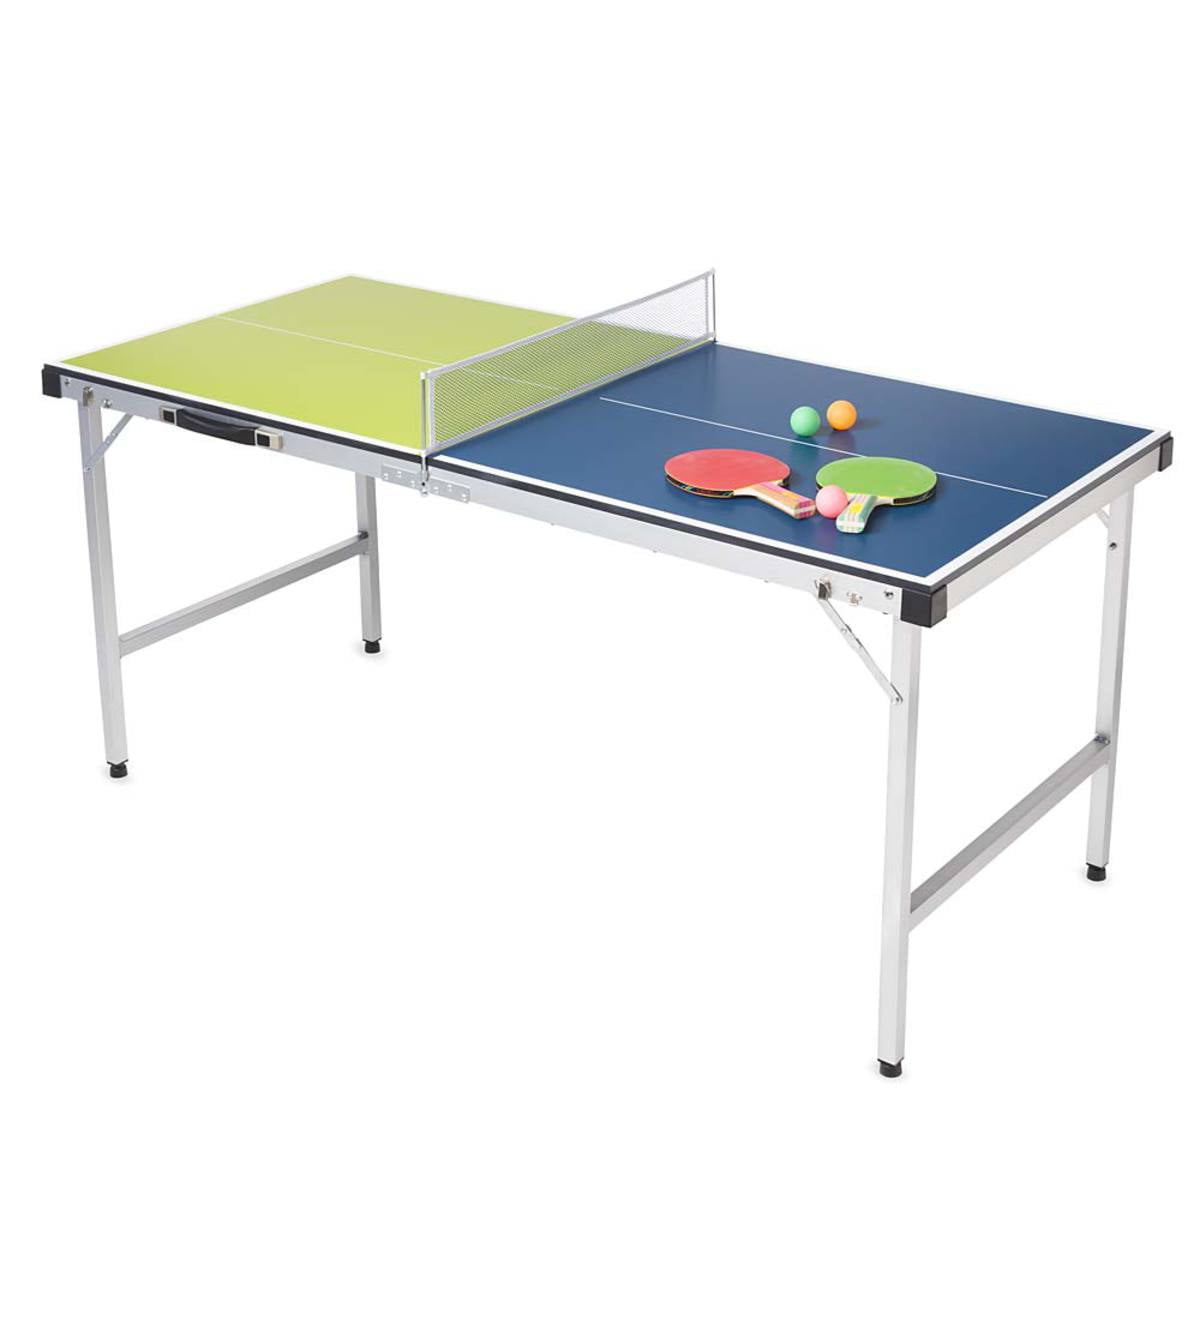 Indoor Mini Table Tennis Table Game Folding Pong Desk Parent-Child Toy Kid 